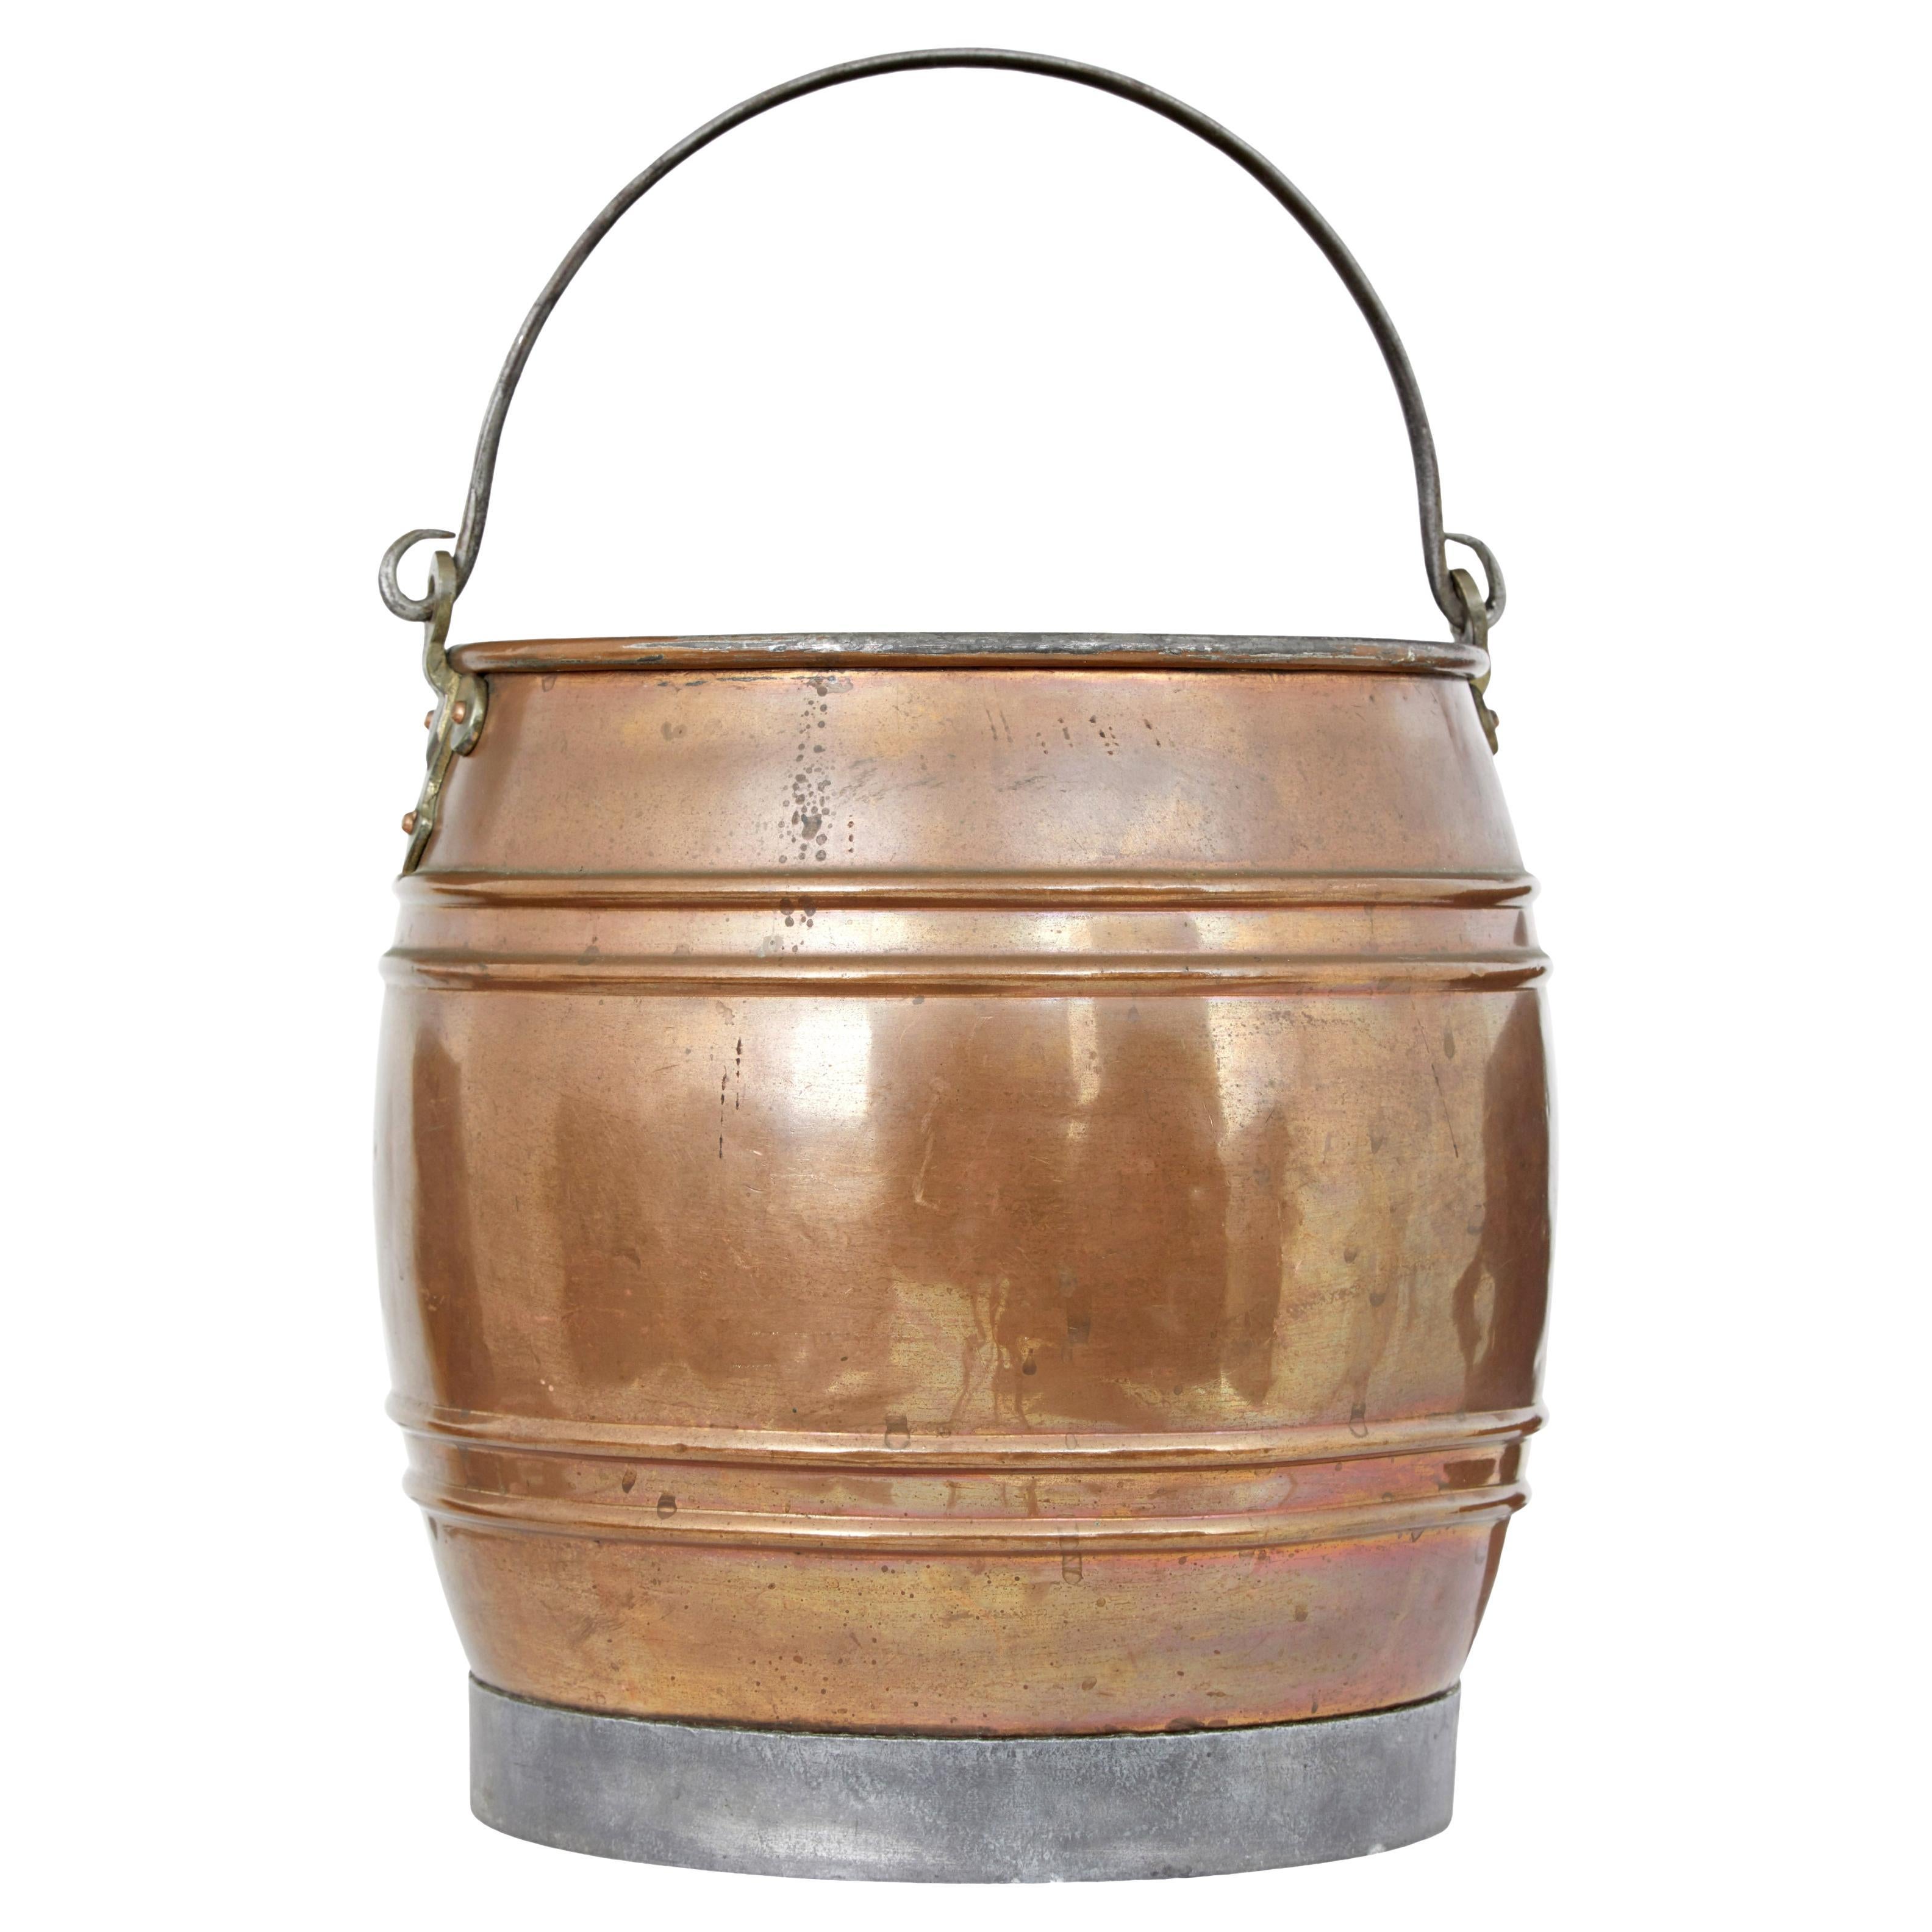 Late 19th century arts and crafts copper bucket